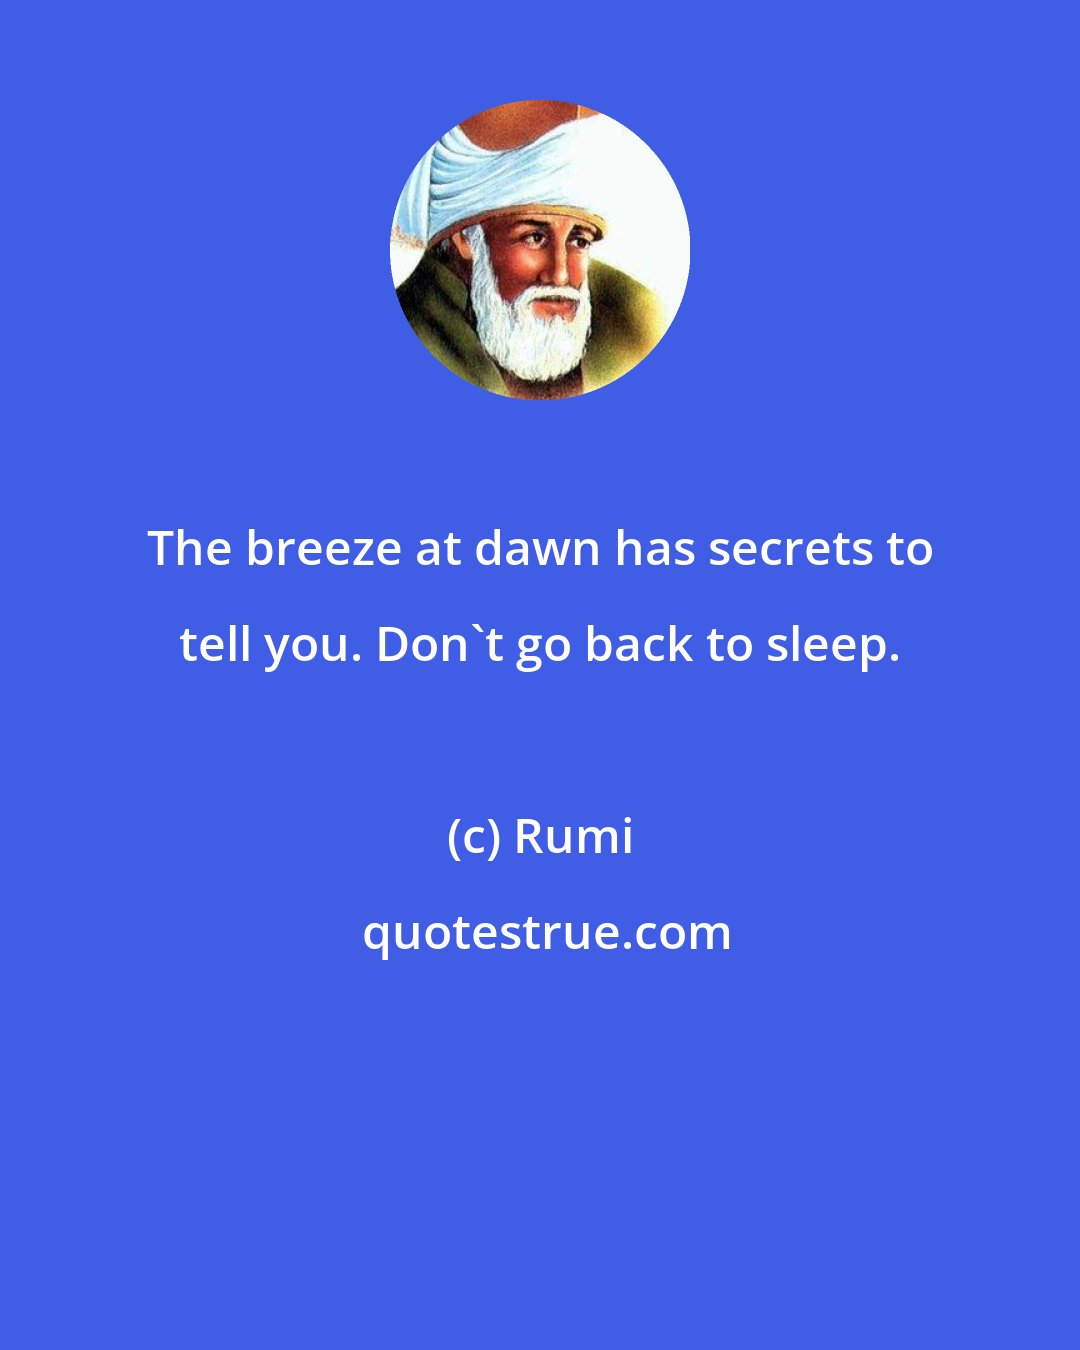 Rumi: The breeze at dawn has secrets to tell you. Don't go back to sleep.